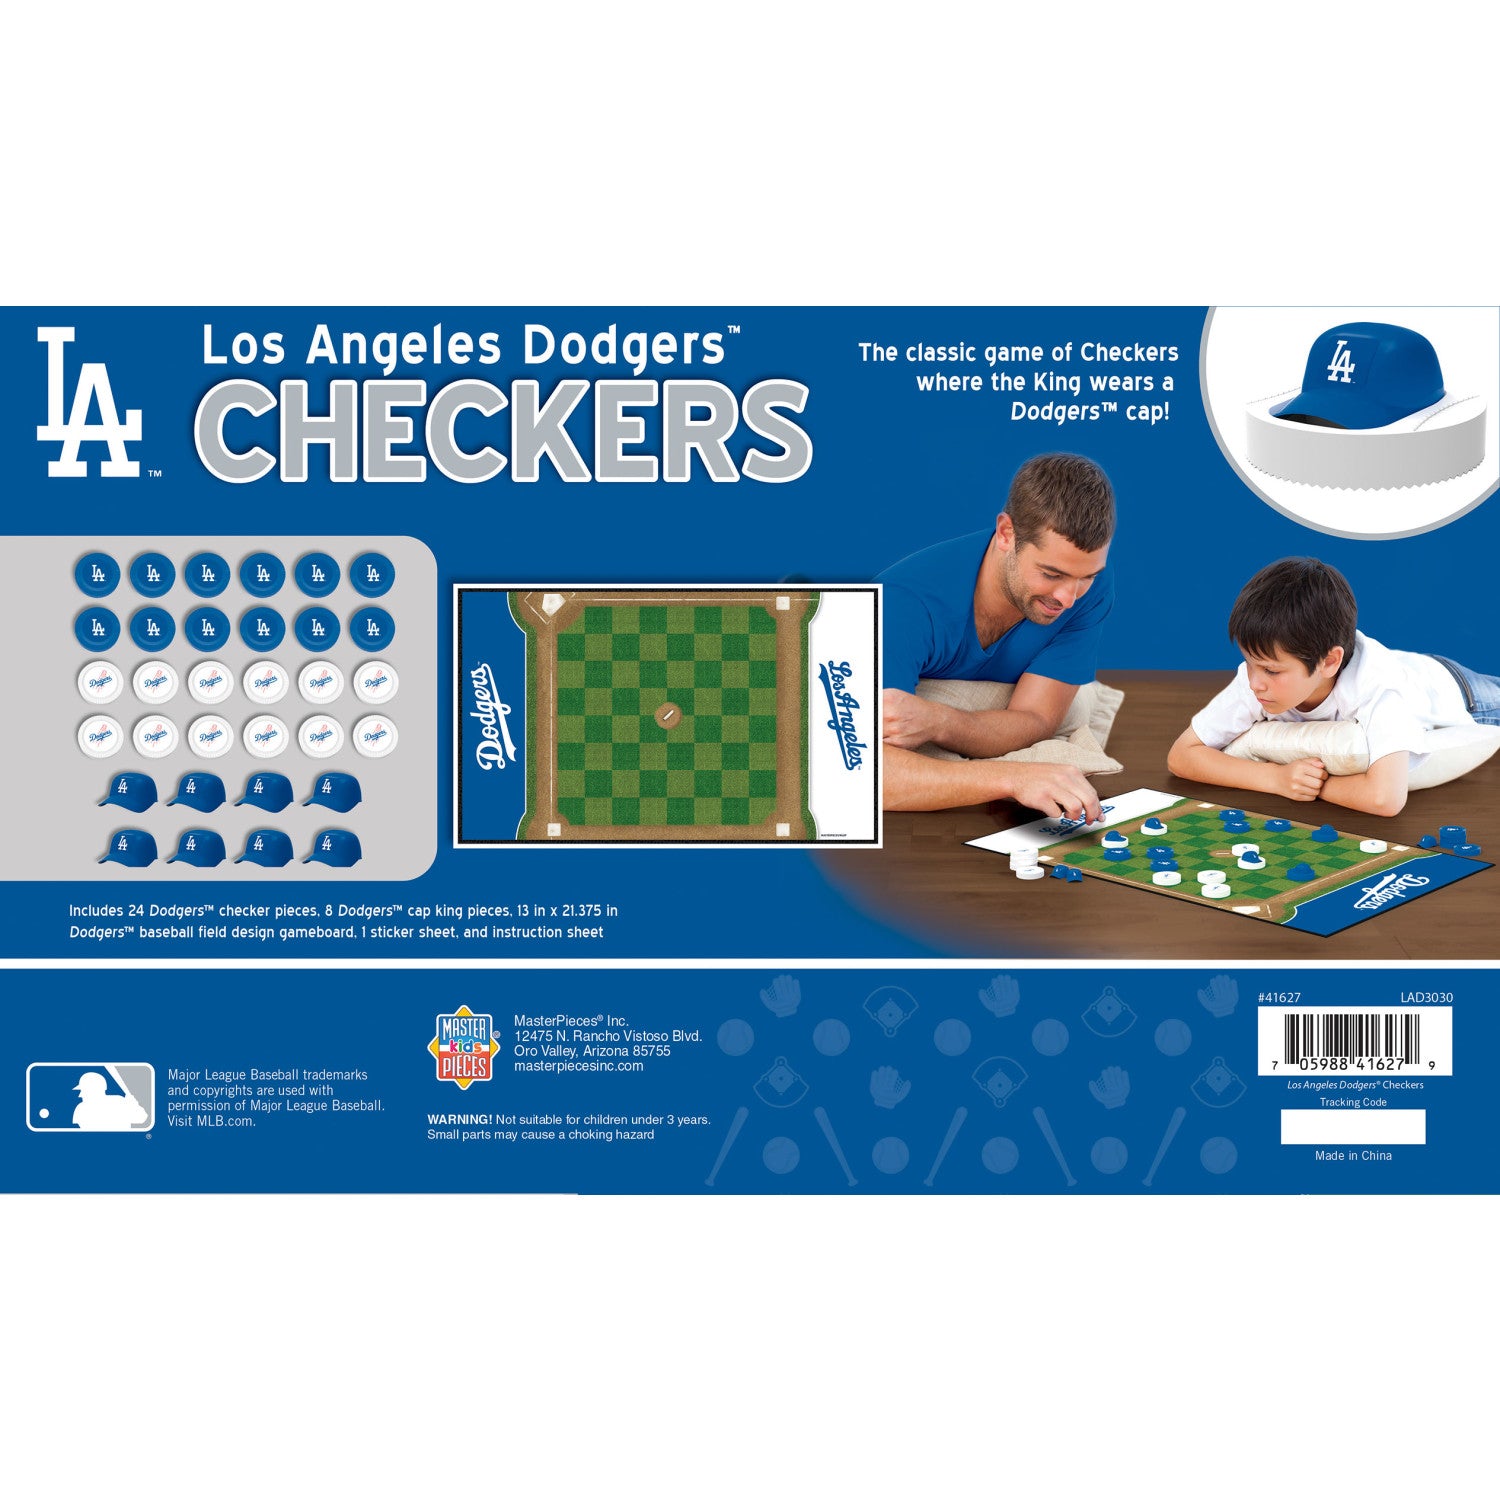 Los Angeles Dodgers Checkers